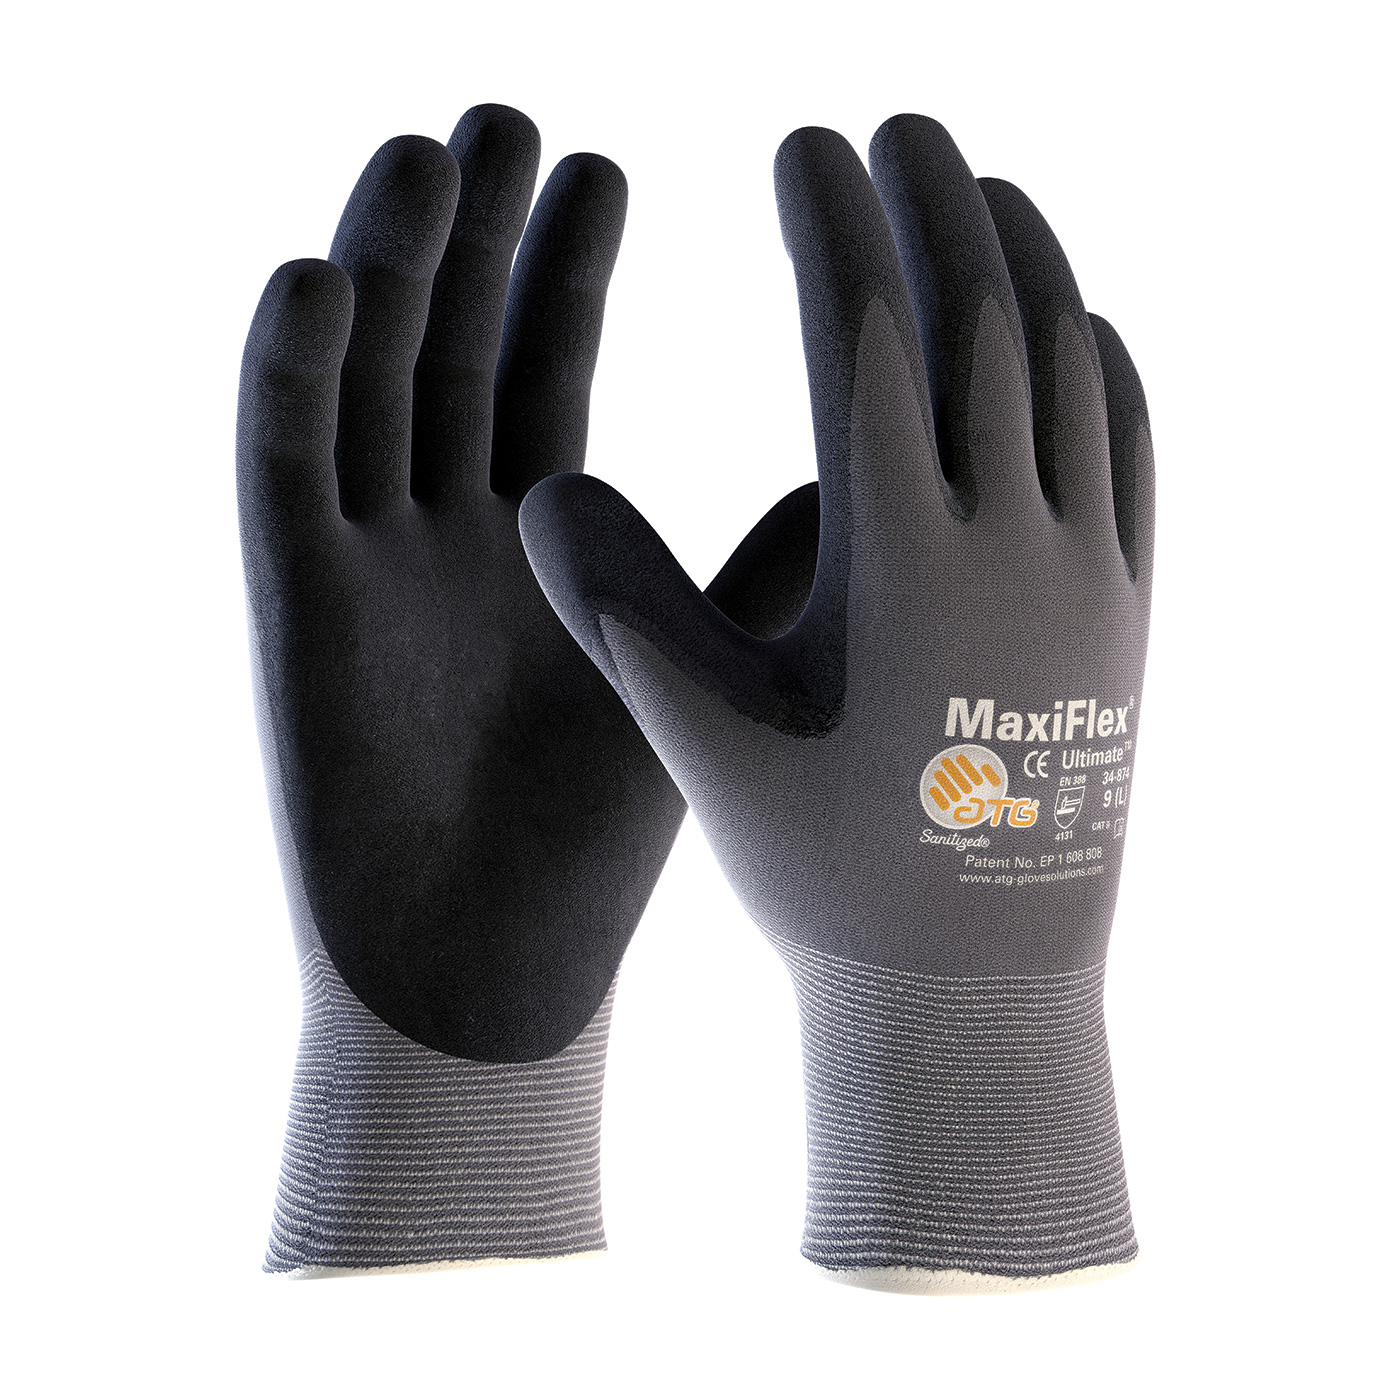 PIP 34-874/L MaxiFlex Ultimate Seamless Knit Nylon/Lycra Glove with Nitrile Coated MicroFoam Grip on Palm & Fingers - Large PID-34 874 L